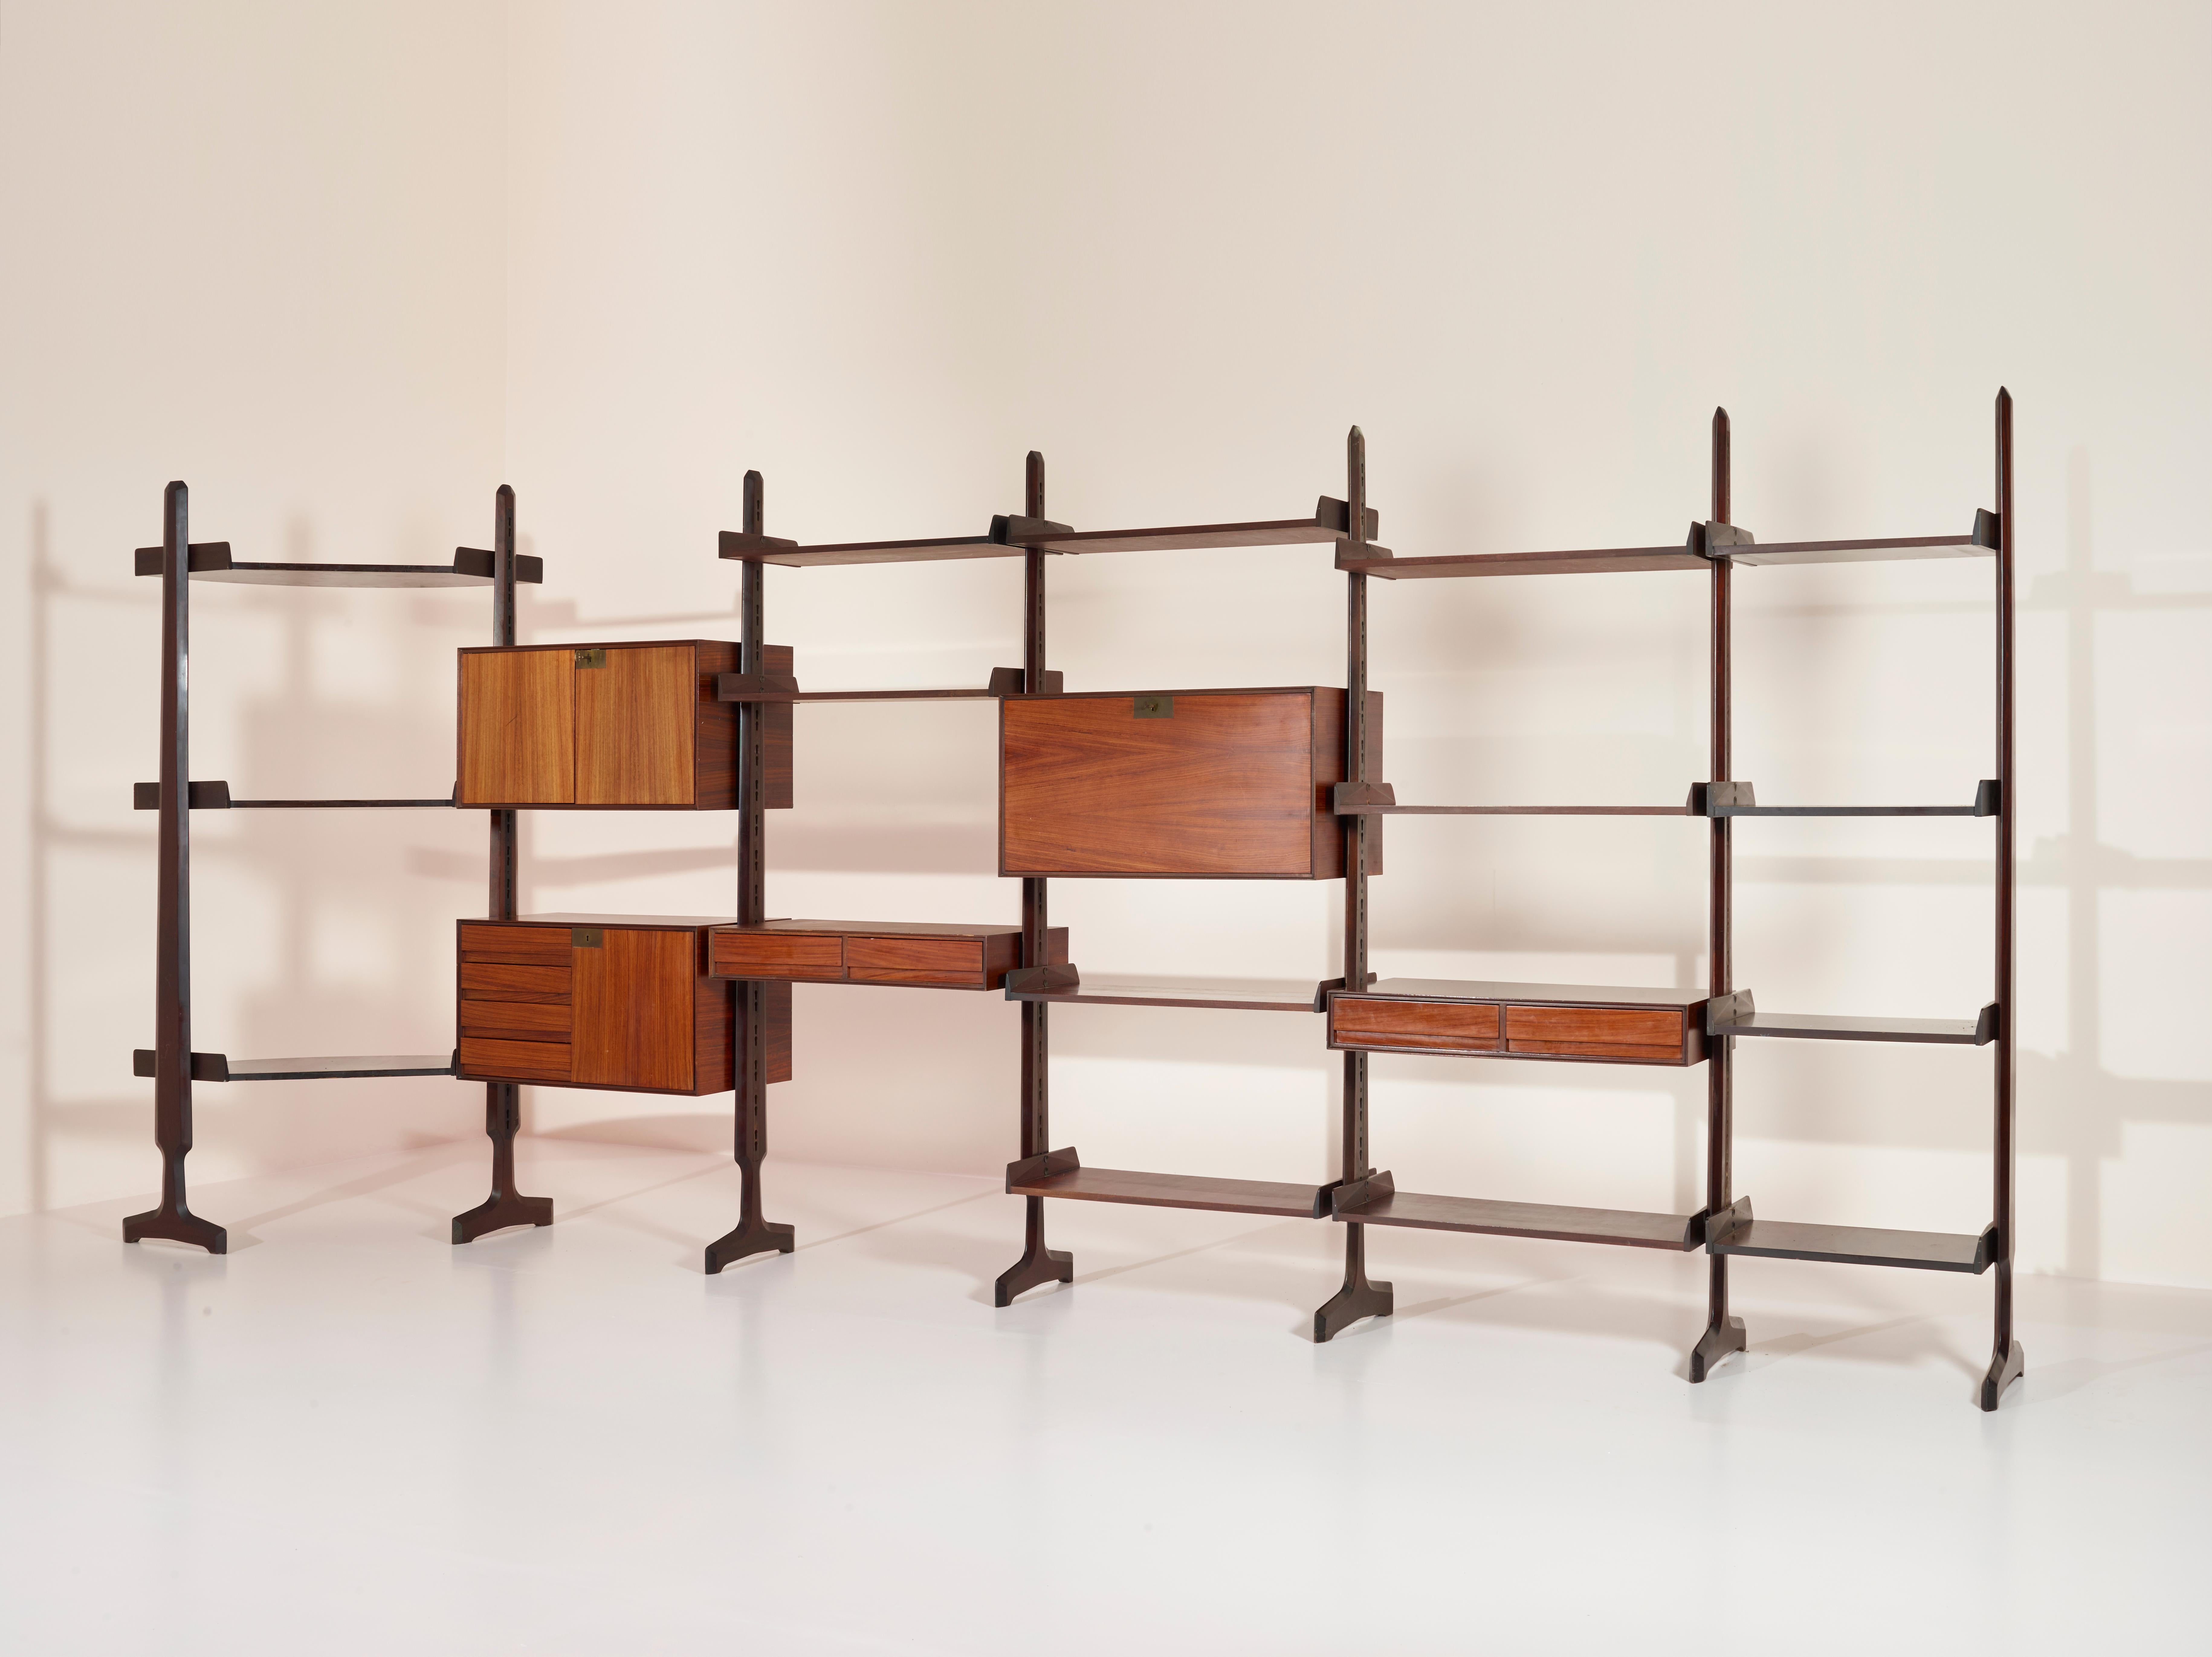 This beautiful and very large freestanding wall unit designed by Edmundo Palutari and produced by Vittorio Dassi during the 1950s, is constructed from high-quality teak and features linear brass detailing that adds a touch of elegance and